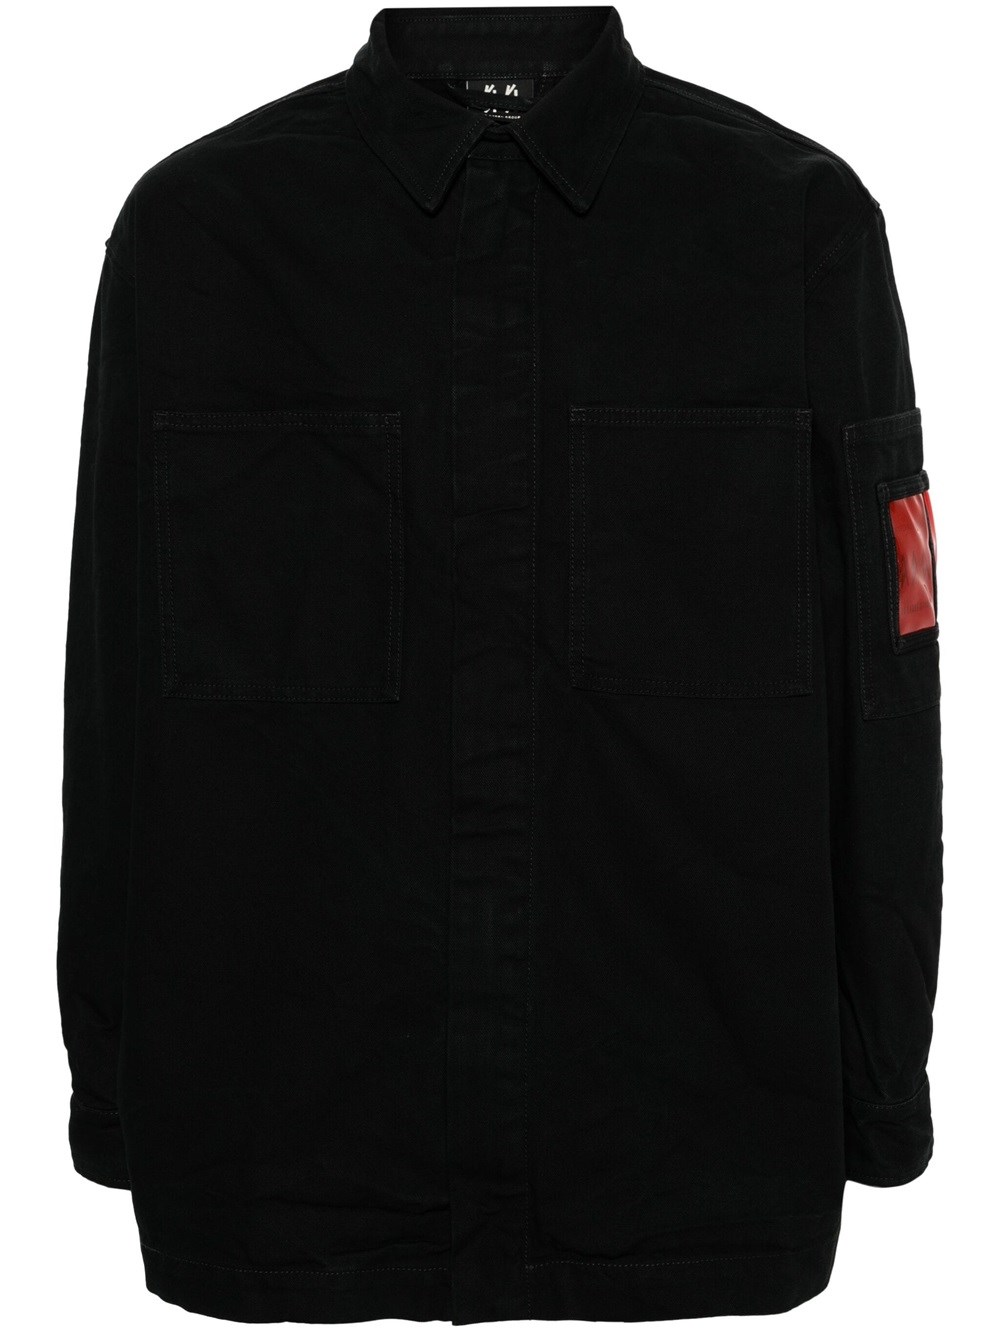 Shop 44 Label Group Cotton Overshirt For Hangovers In Black